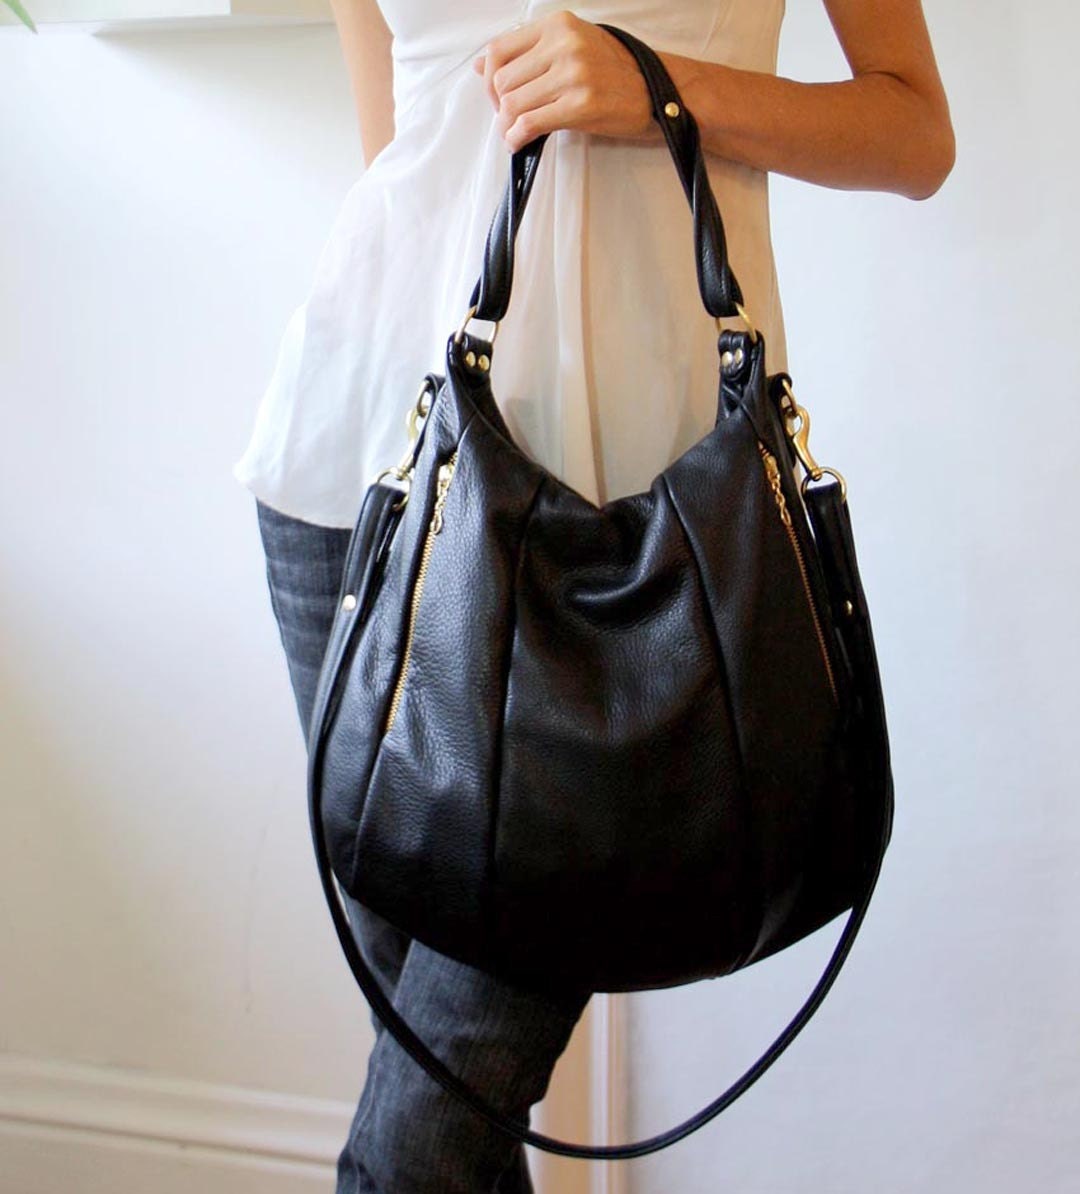 OPELLE Lotus Bag Soft Black Pebbled Leather With Zip Pockets -   Australia